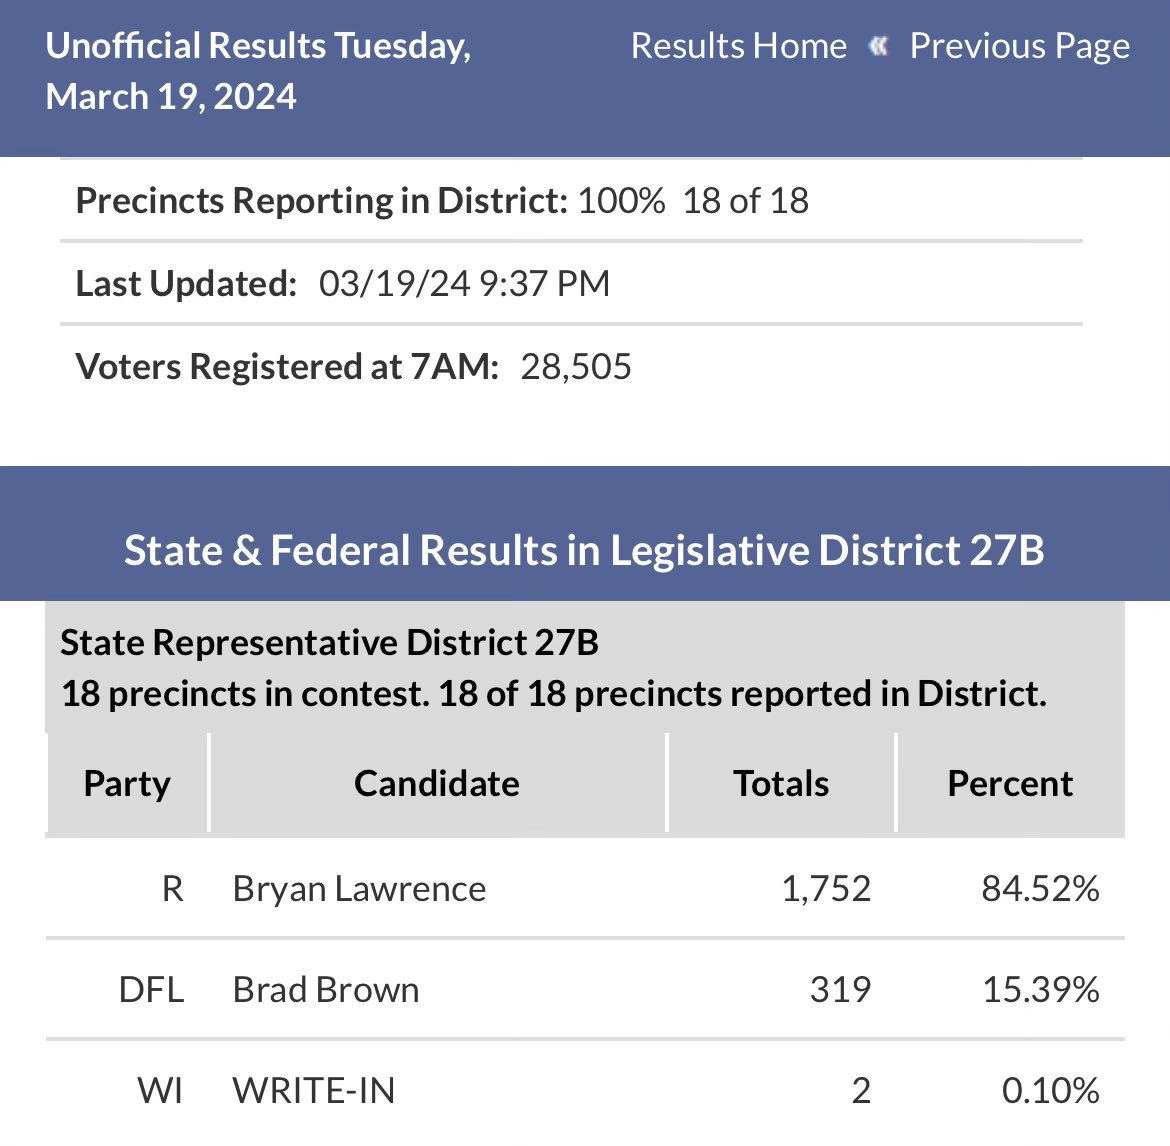 Big win tonight for @LawrenceforMN in the 27B special election! Congrats! #mnleg